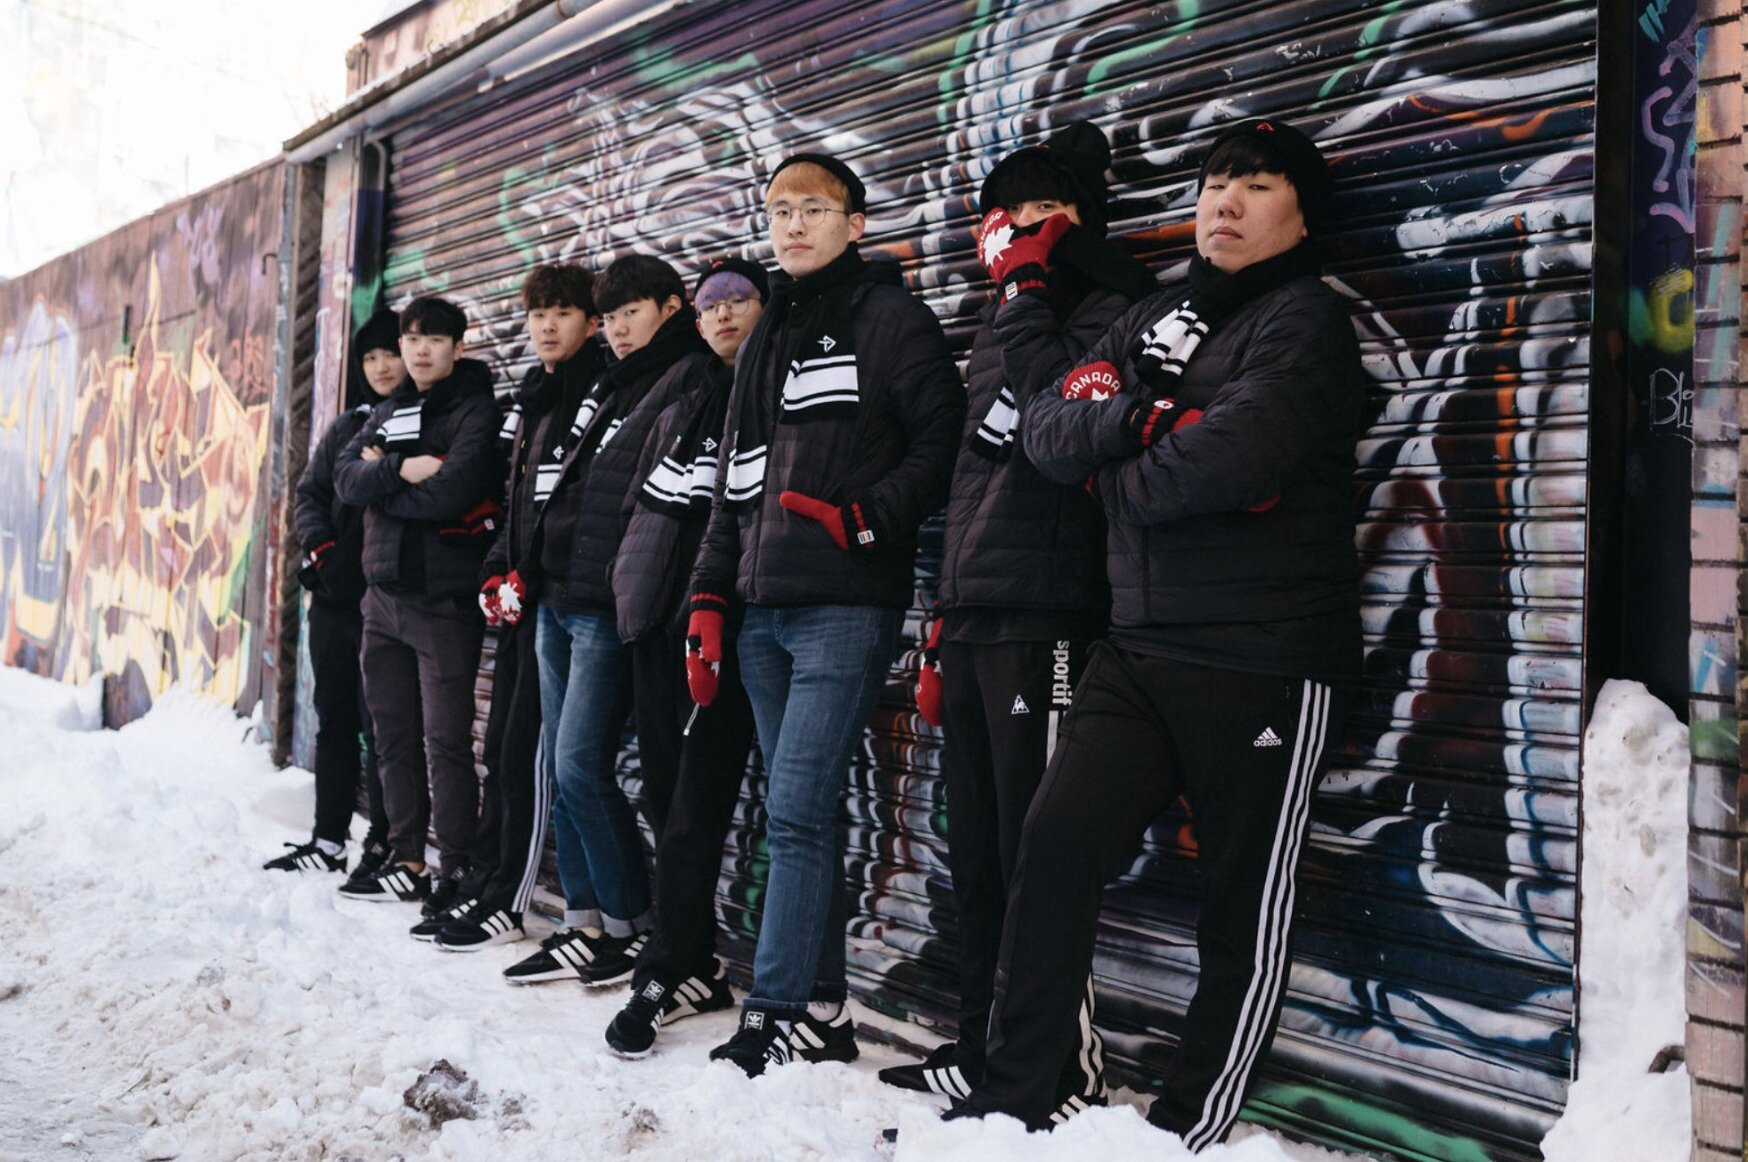 We spoke with some of the players from the Defiant to hear about their first impressions of the Canada and what it means to represent the Great White North. (Photo courtesy the Toronto Defiant)